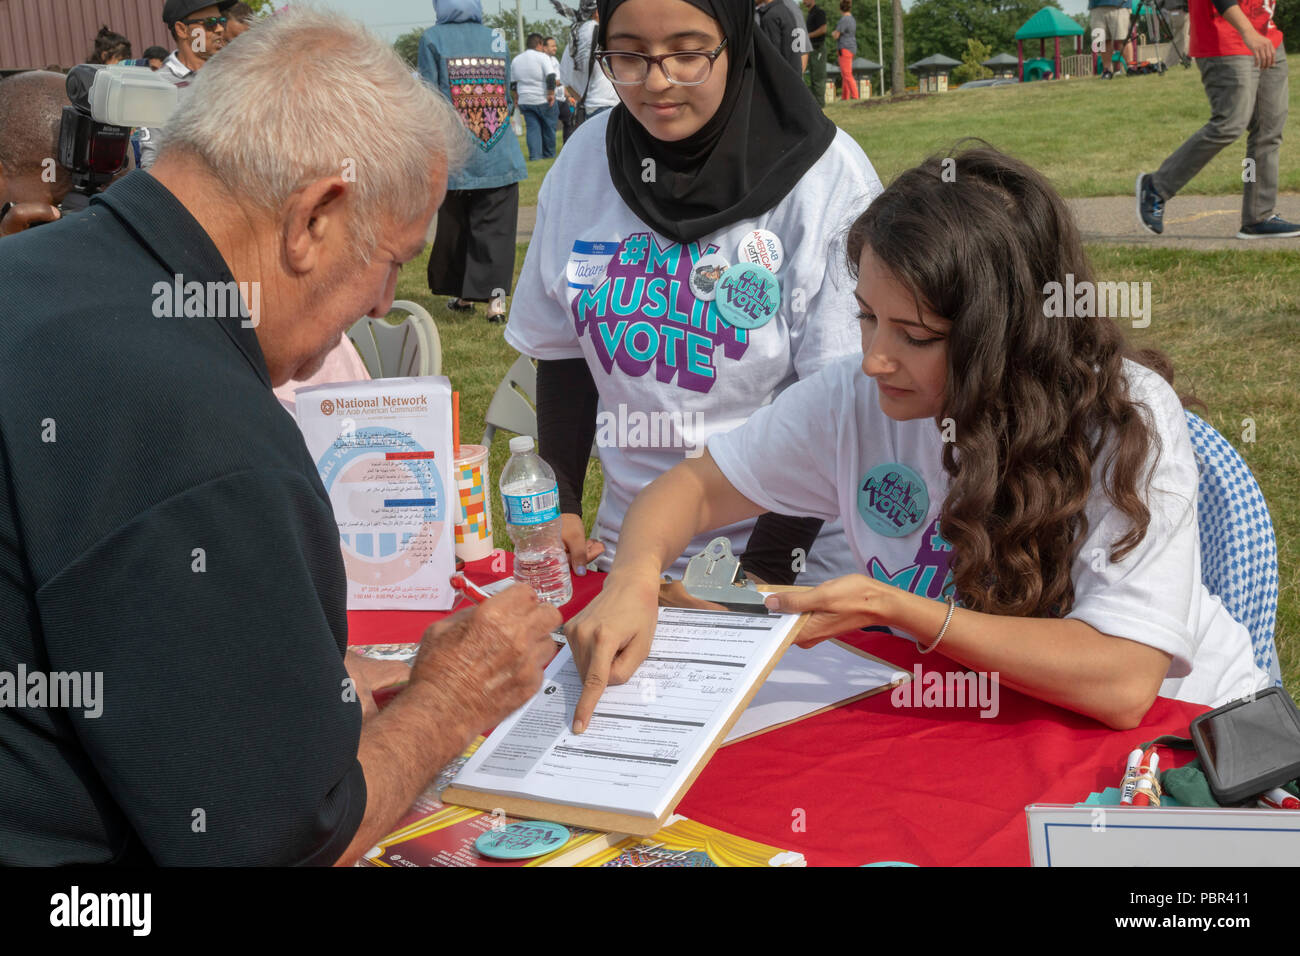 Dearborn, Michigan USA - 29 July 2018 - A man registers to vote at a Muslim Get Out the Vote rally, sponsored by several Muslim community organizations. The rally featured entertainment and speeches from Muslim and other progressive political candidates. Credit: Jim West/Alamy Live News Stock Photo